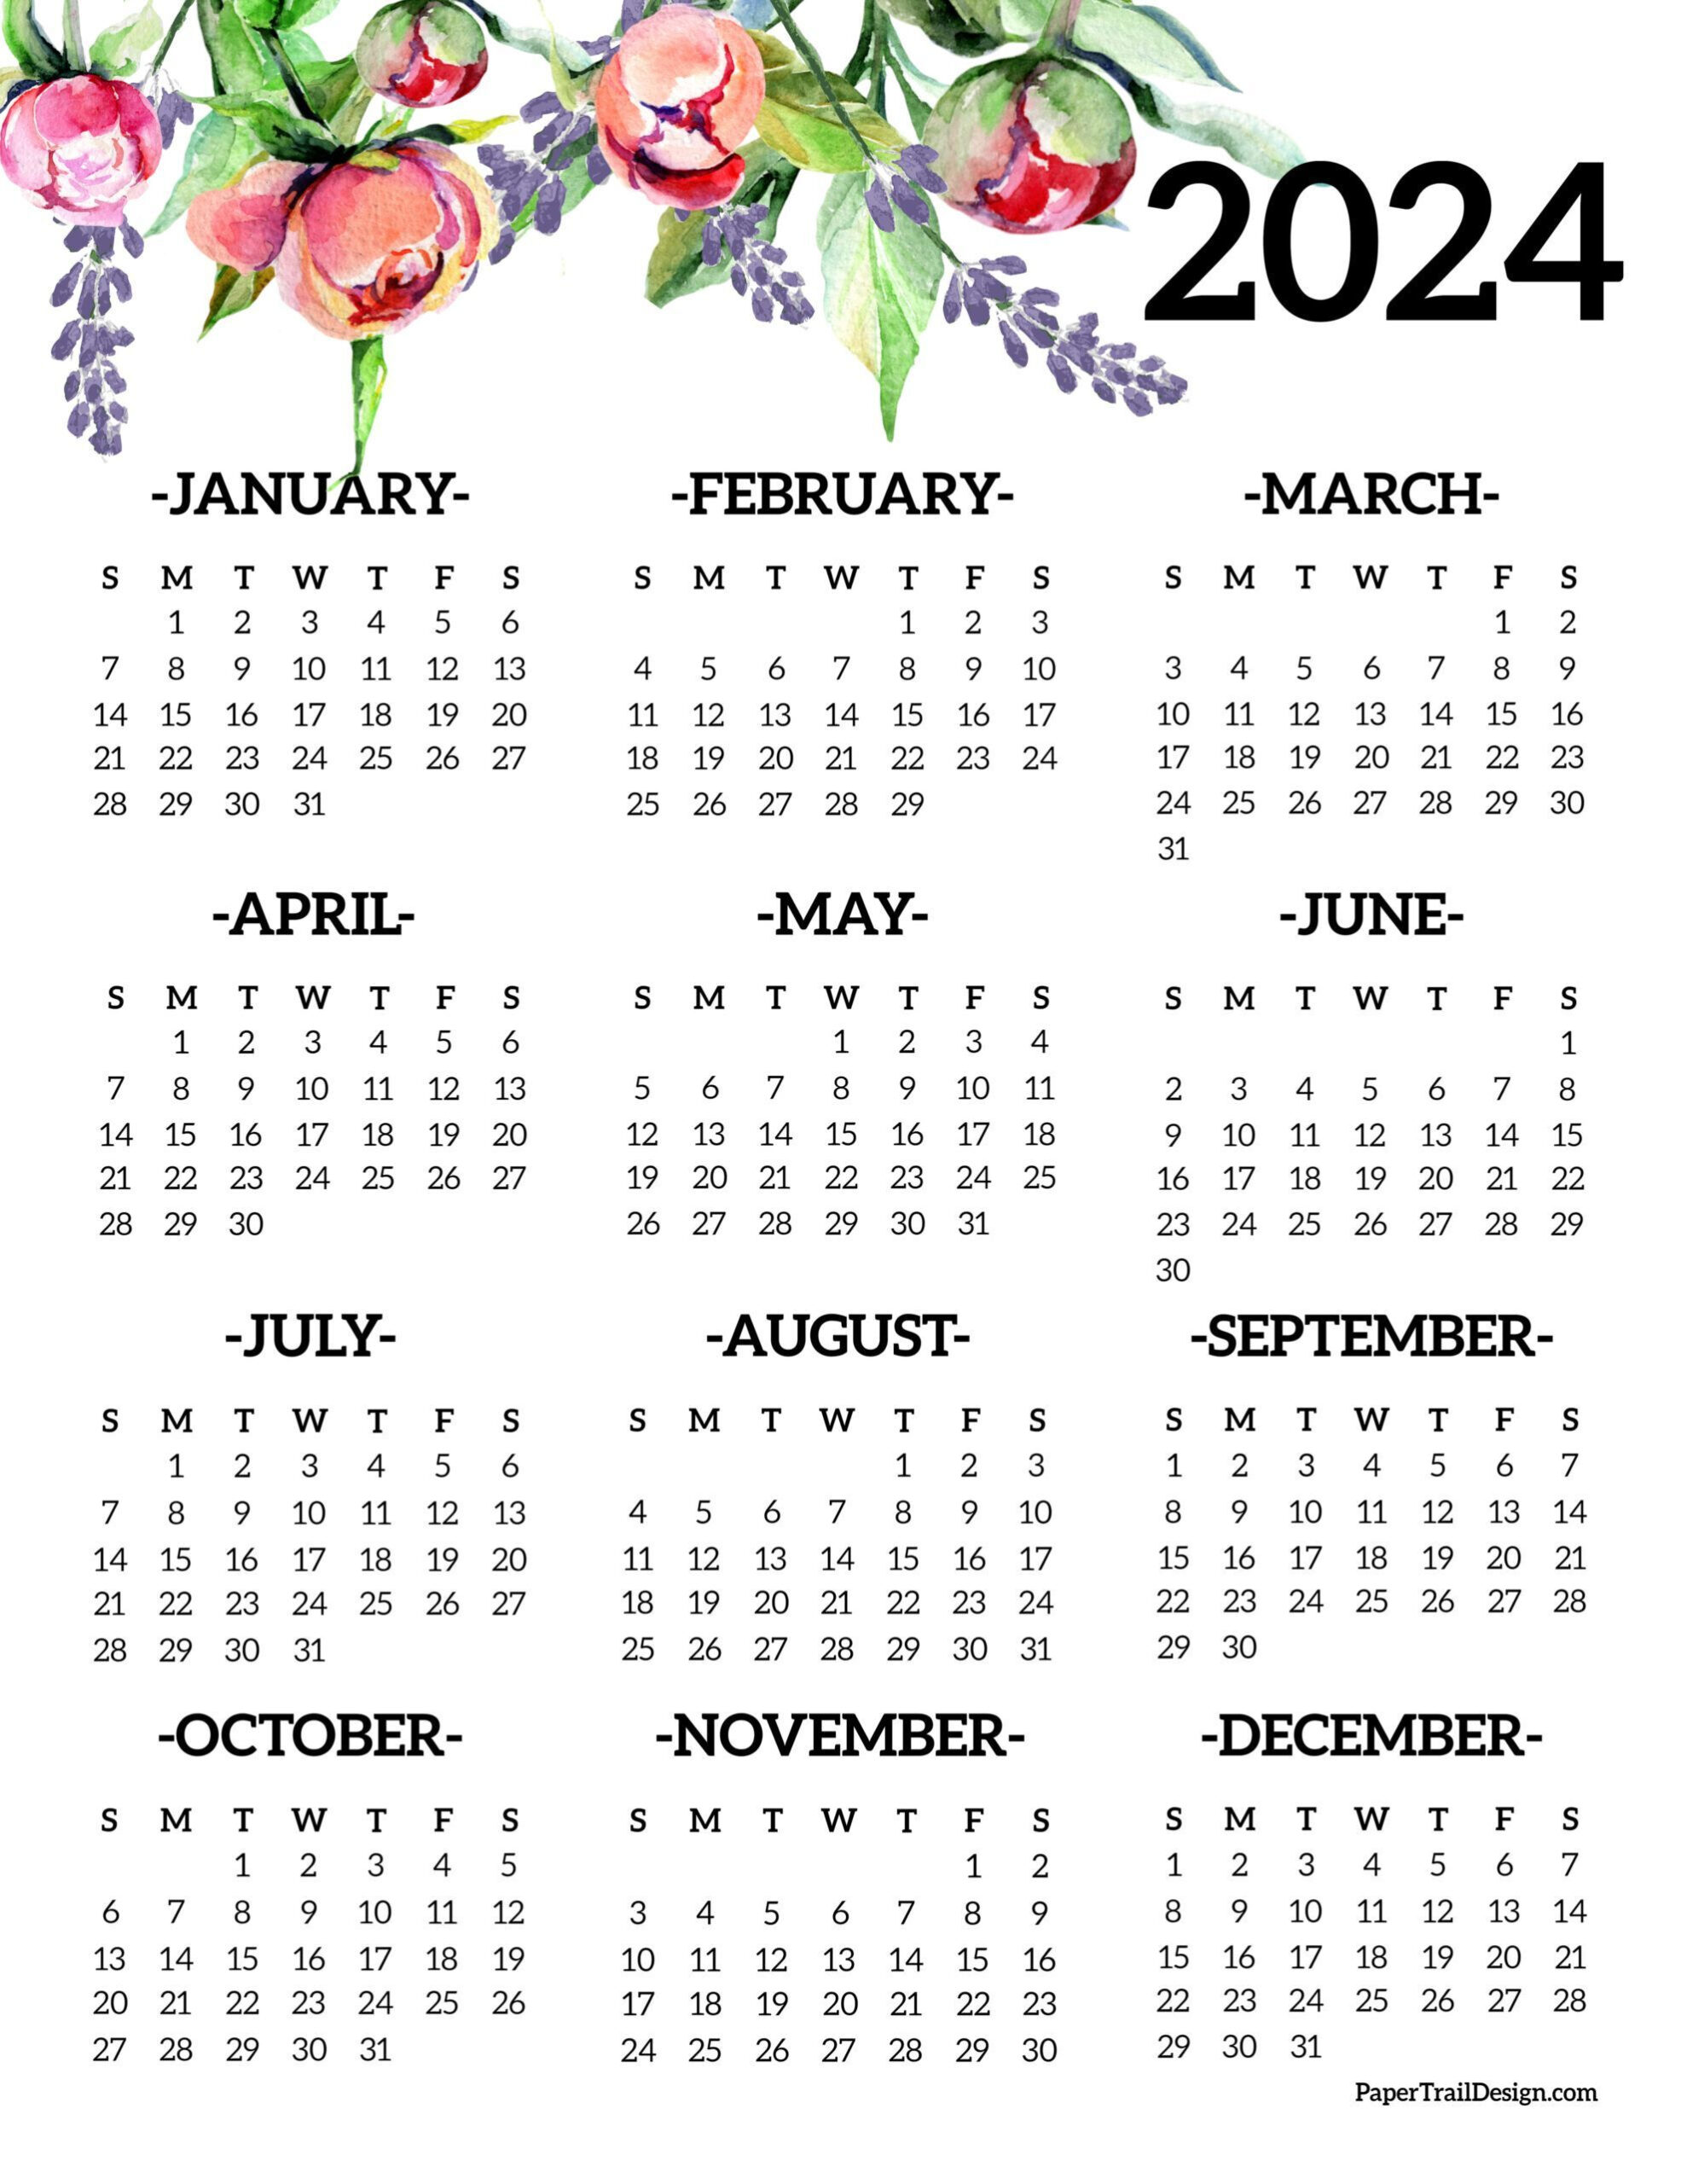 Calendar 2024 Printable One Page | Paper Trail Design In 2023 | Printable Calendar 2024 One Page Pdf